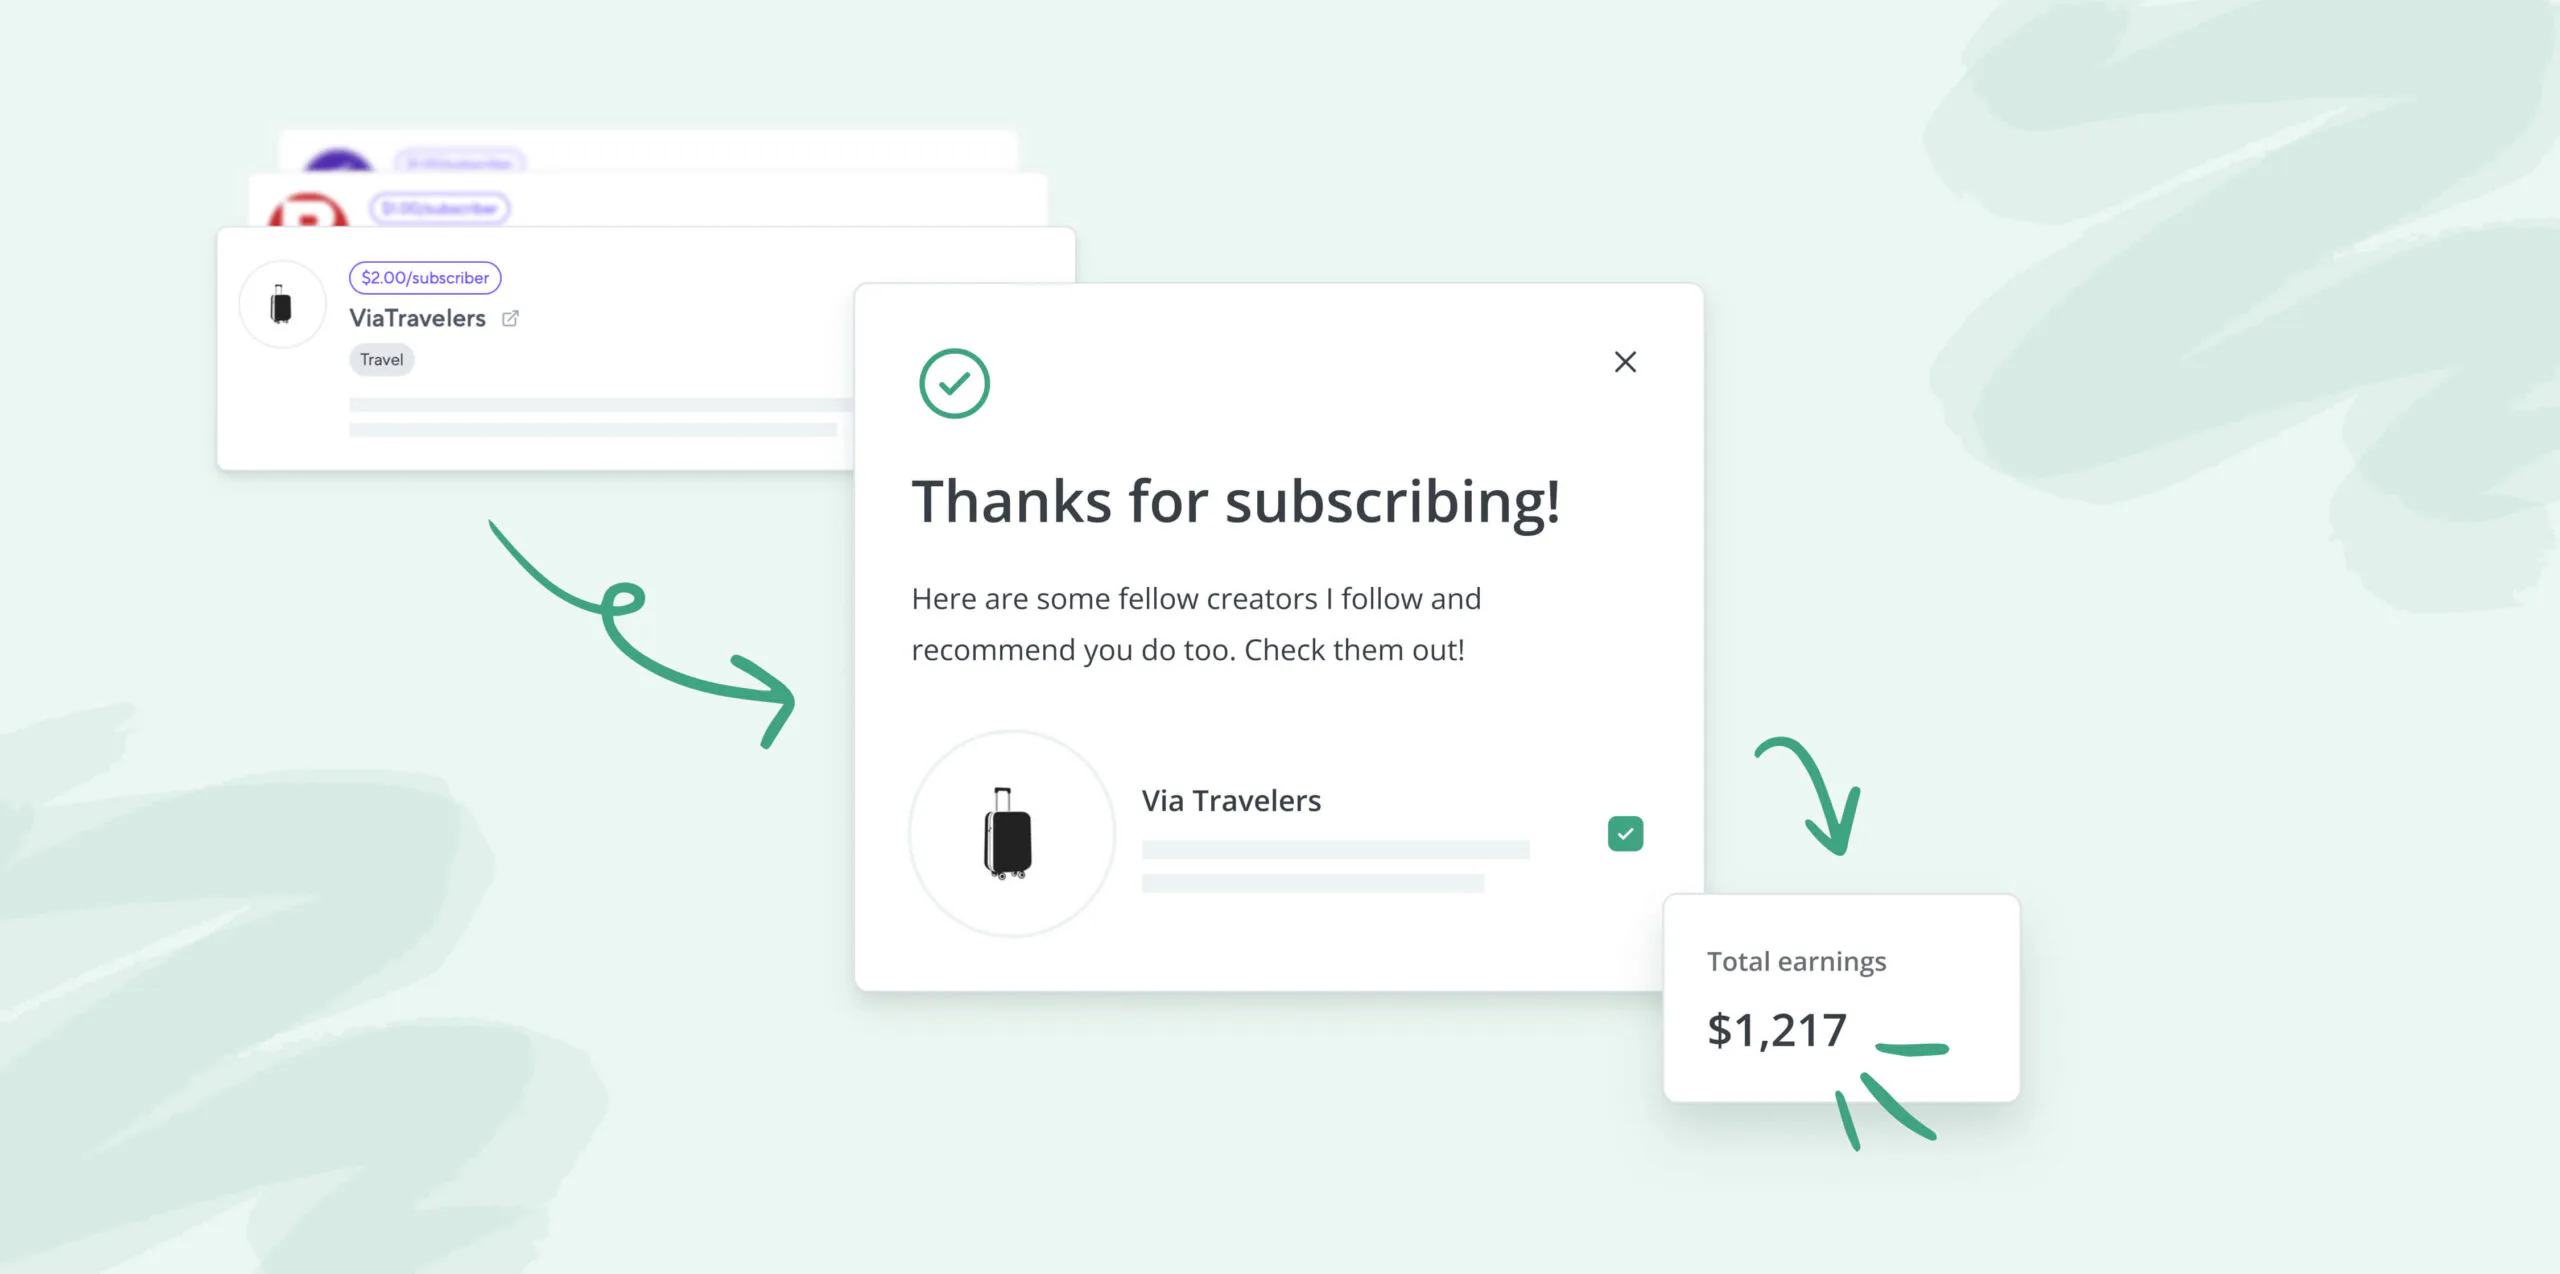 How to use ConvertKit’s Paid Recommendations to grow your income and email list